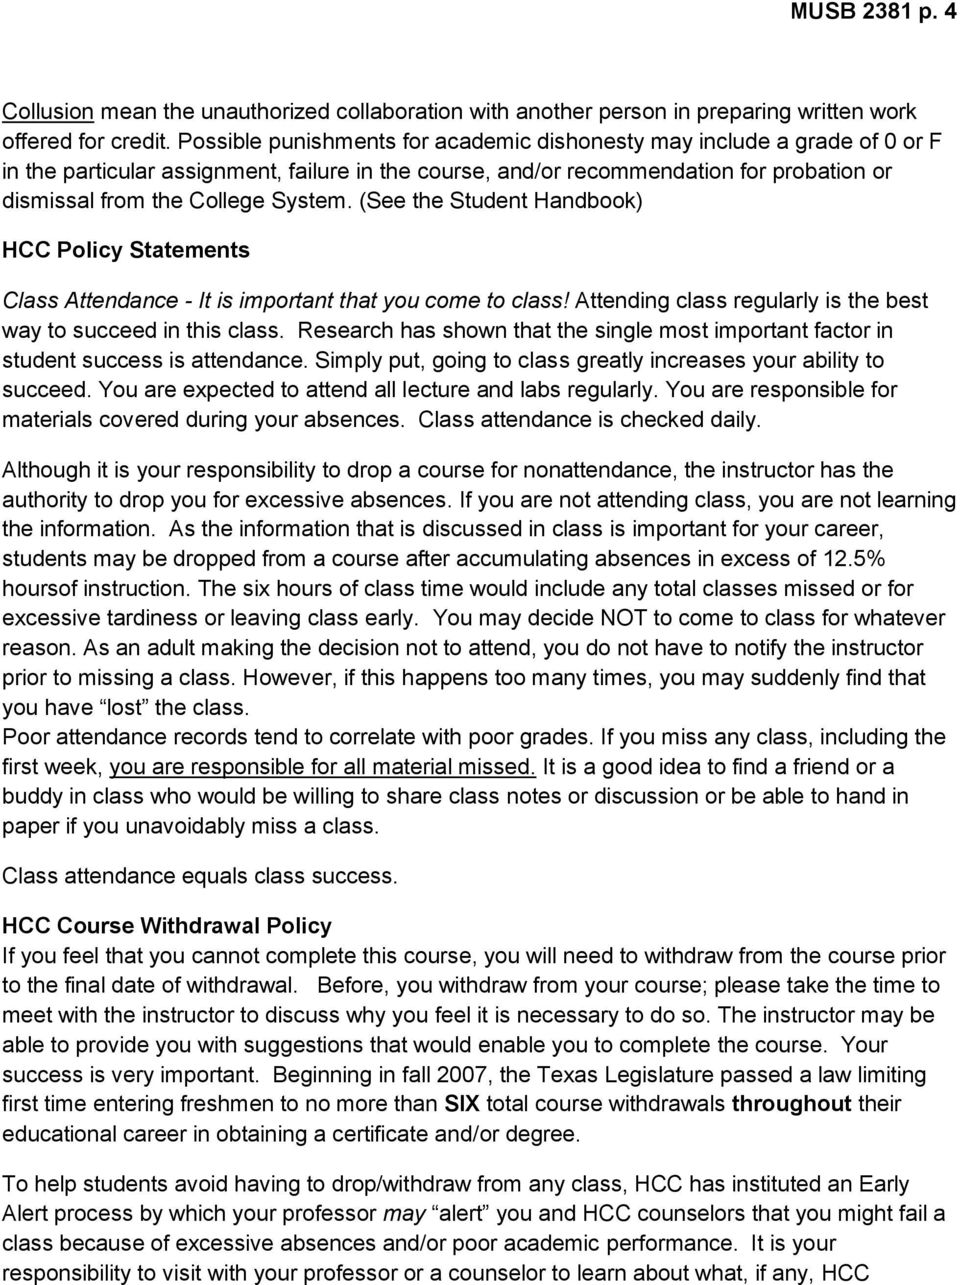 System. (See the Student Handbook) HCC Policy Statements Class Attendance - It is important that you come to class! Attending class regularly is the best way to succeed in this class.